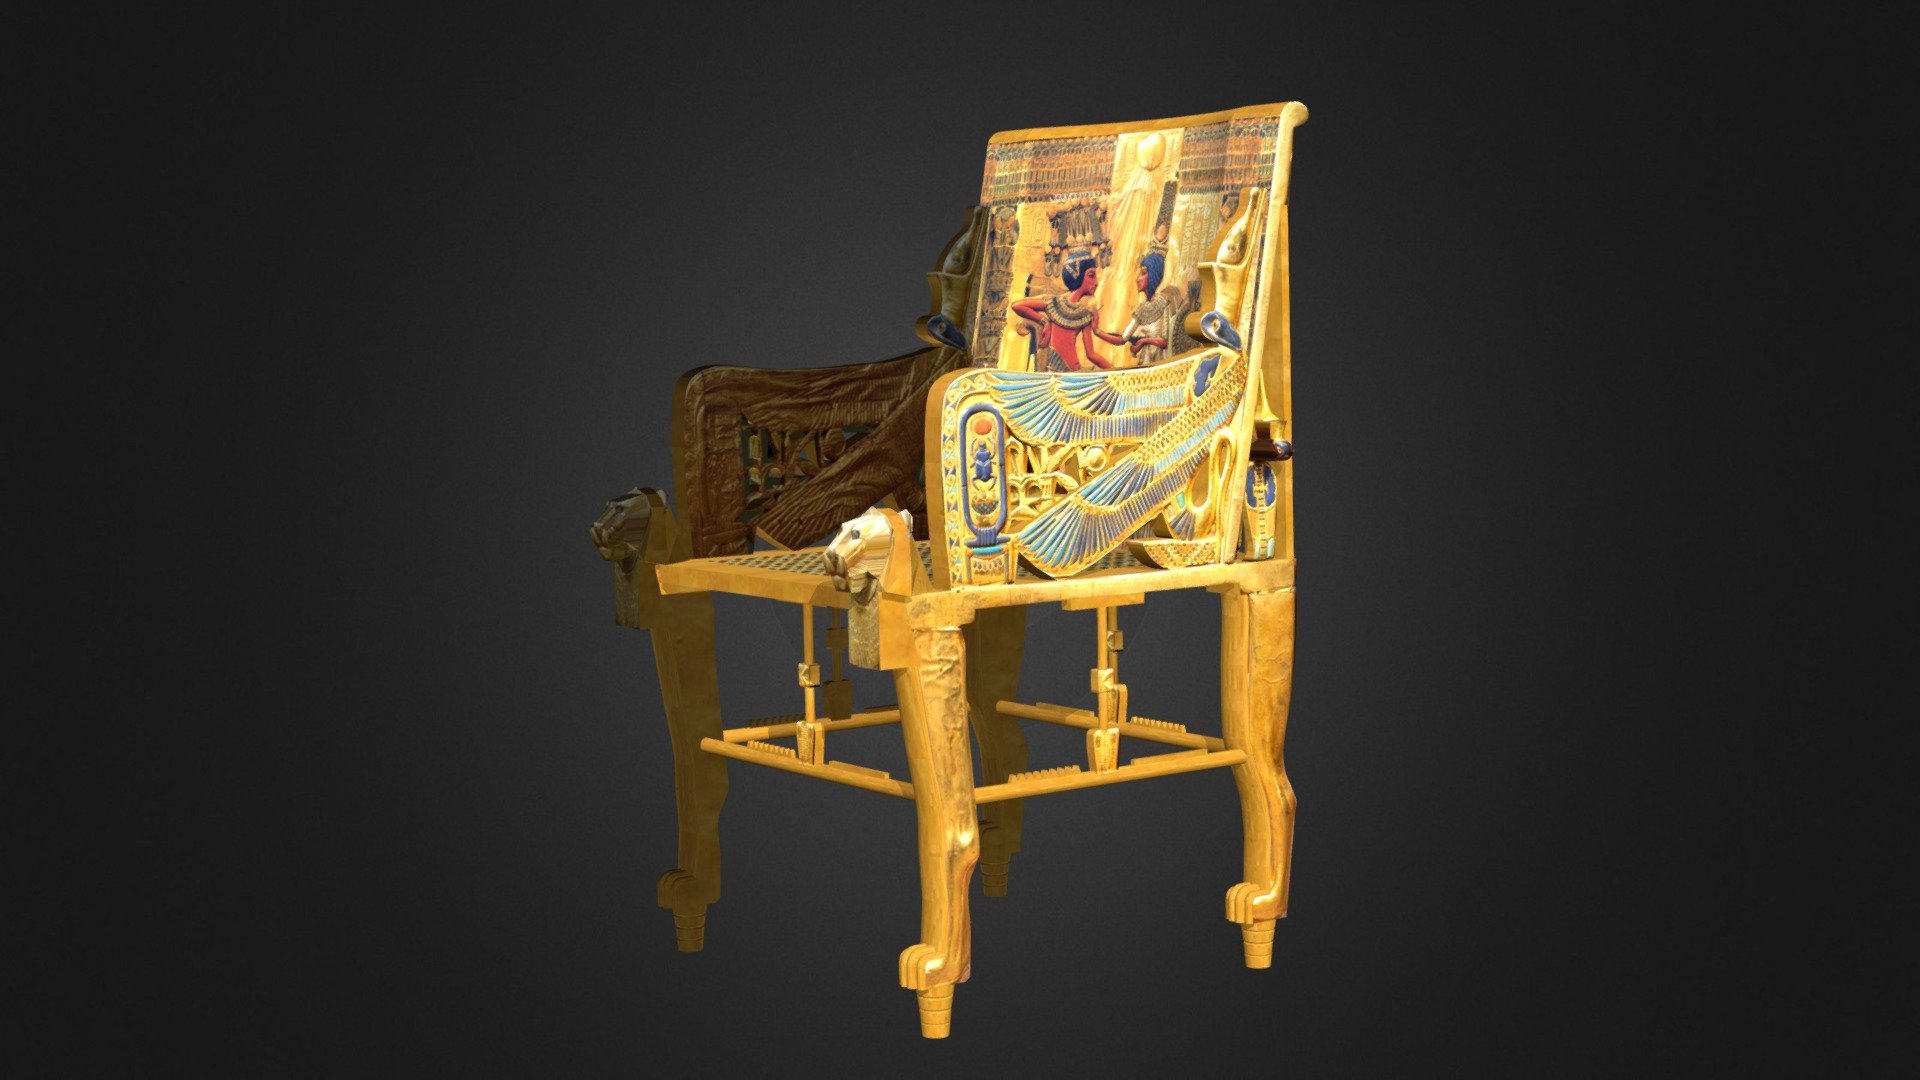 During ancient Egypt the golden throne was a symbol of power and a show of social status. This amazing piece of furniture is the most prestigest of all the thrones discovered from the ancient society. It was found in the Annexe area of Tutankhaman's tomb. It was constructed with the most finest materials such as gold to create this amazing art 3d model